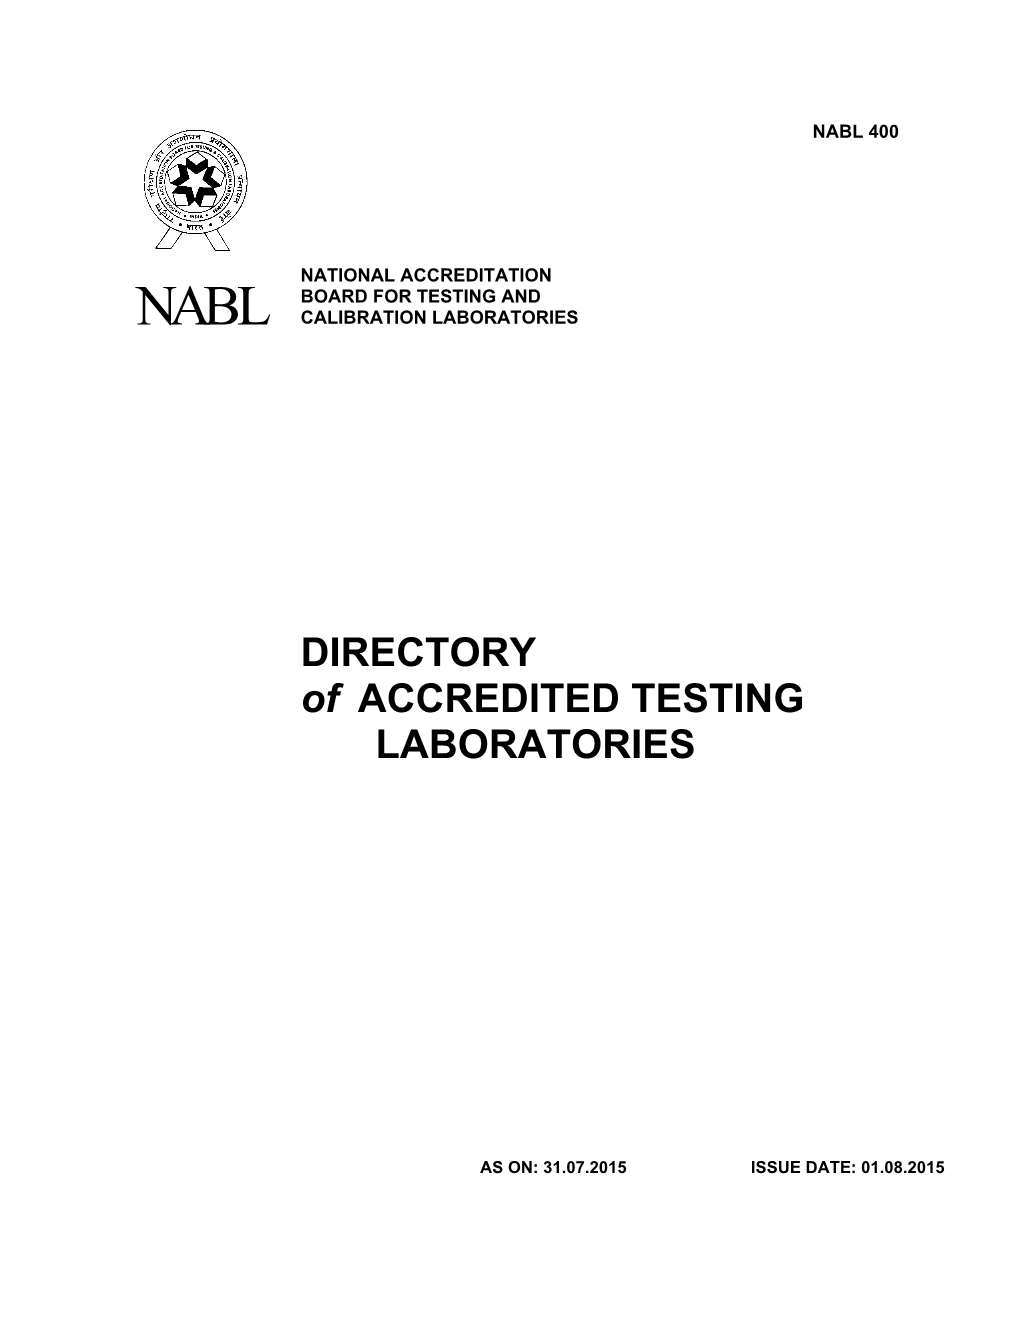 DIRECTORY of ACCREDITED TESTING